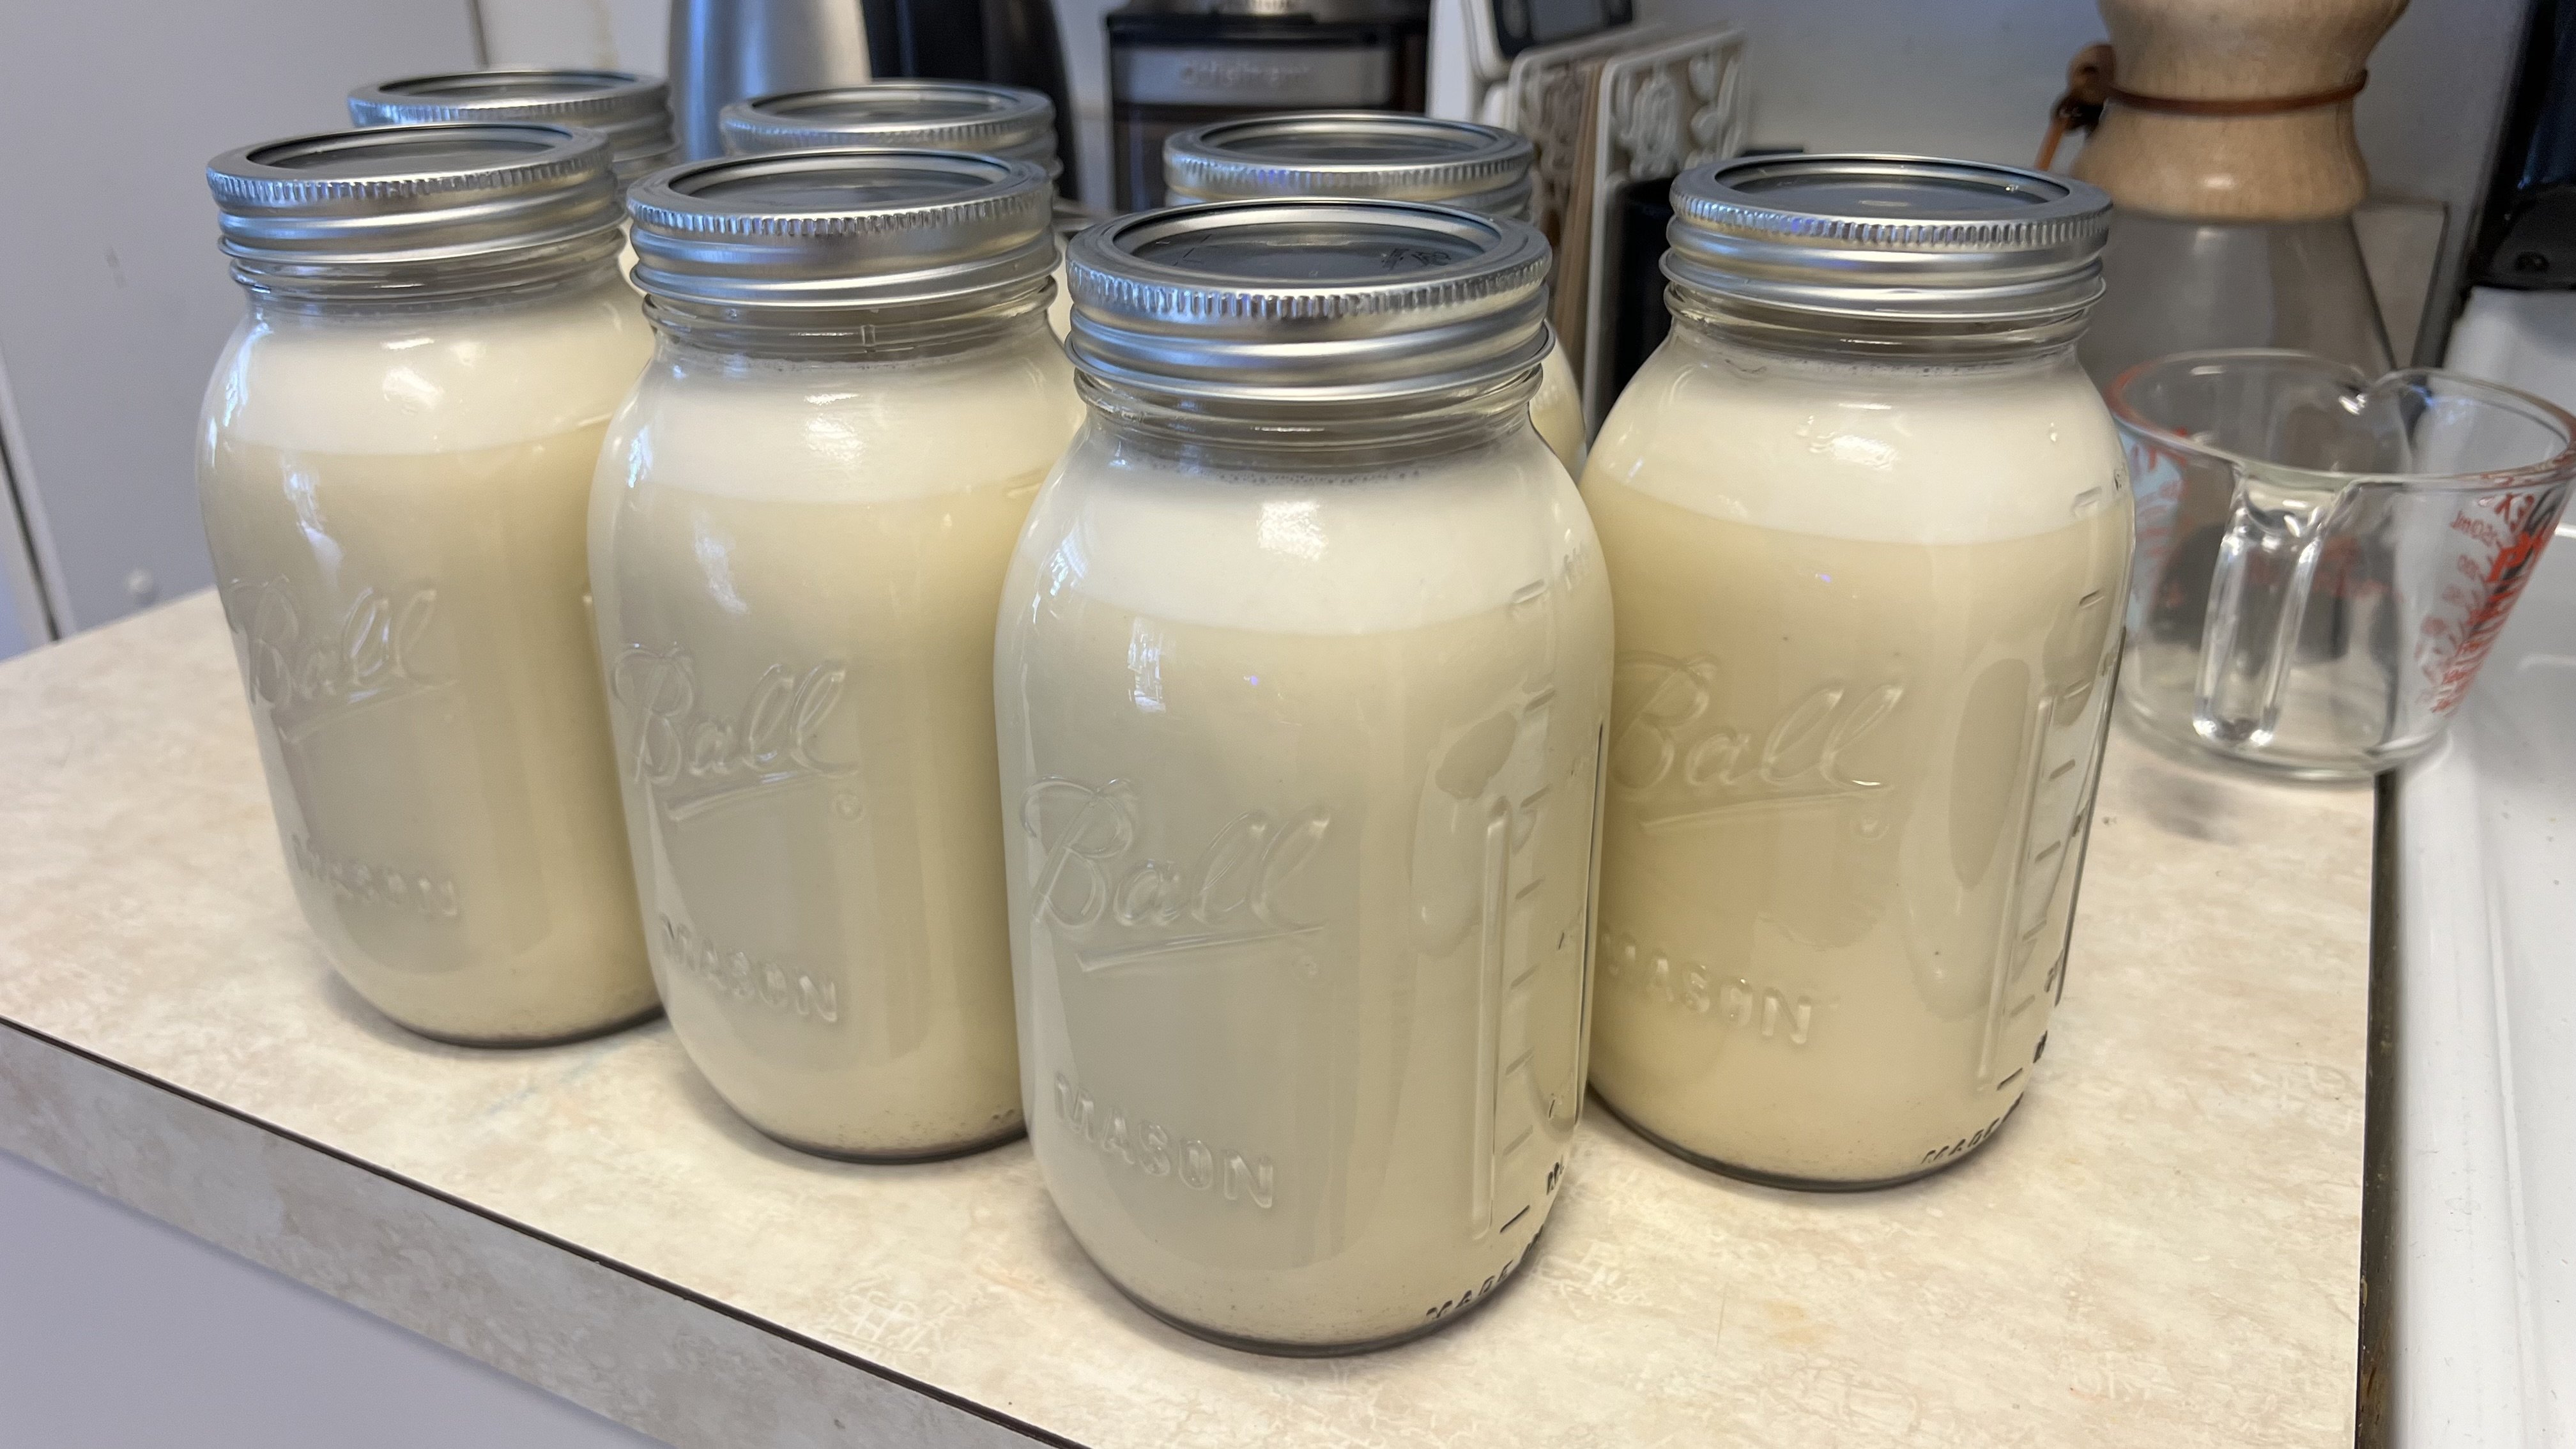 Seven Ball-branded, quart-size Mason jars with lids, filled with homemade egg nog, sitting on a light colored kitchen counter. A Pyrex measuring cup, a Chemex pour-over coffee maker, a coffee grinder, and electric water kettle are in the background.